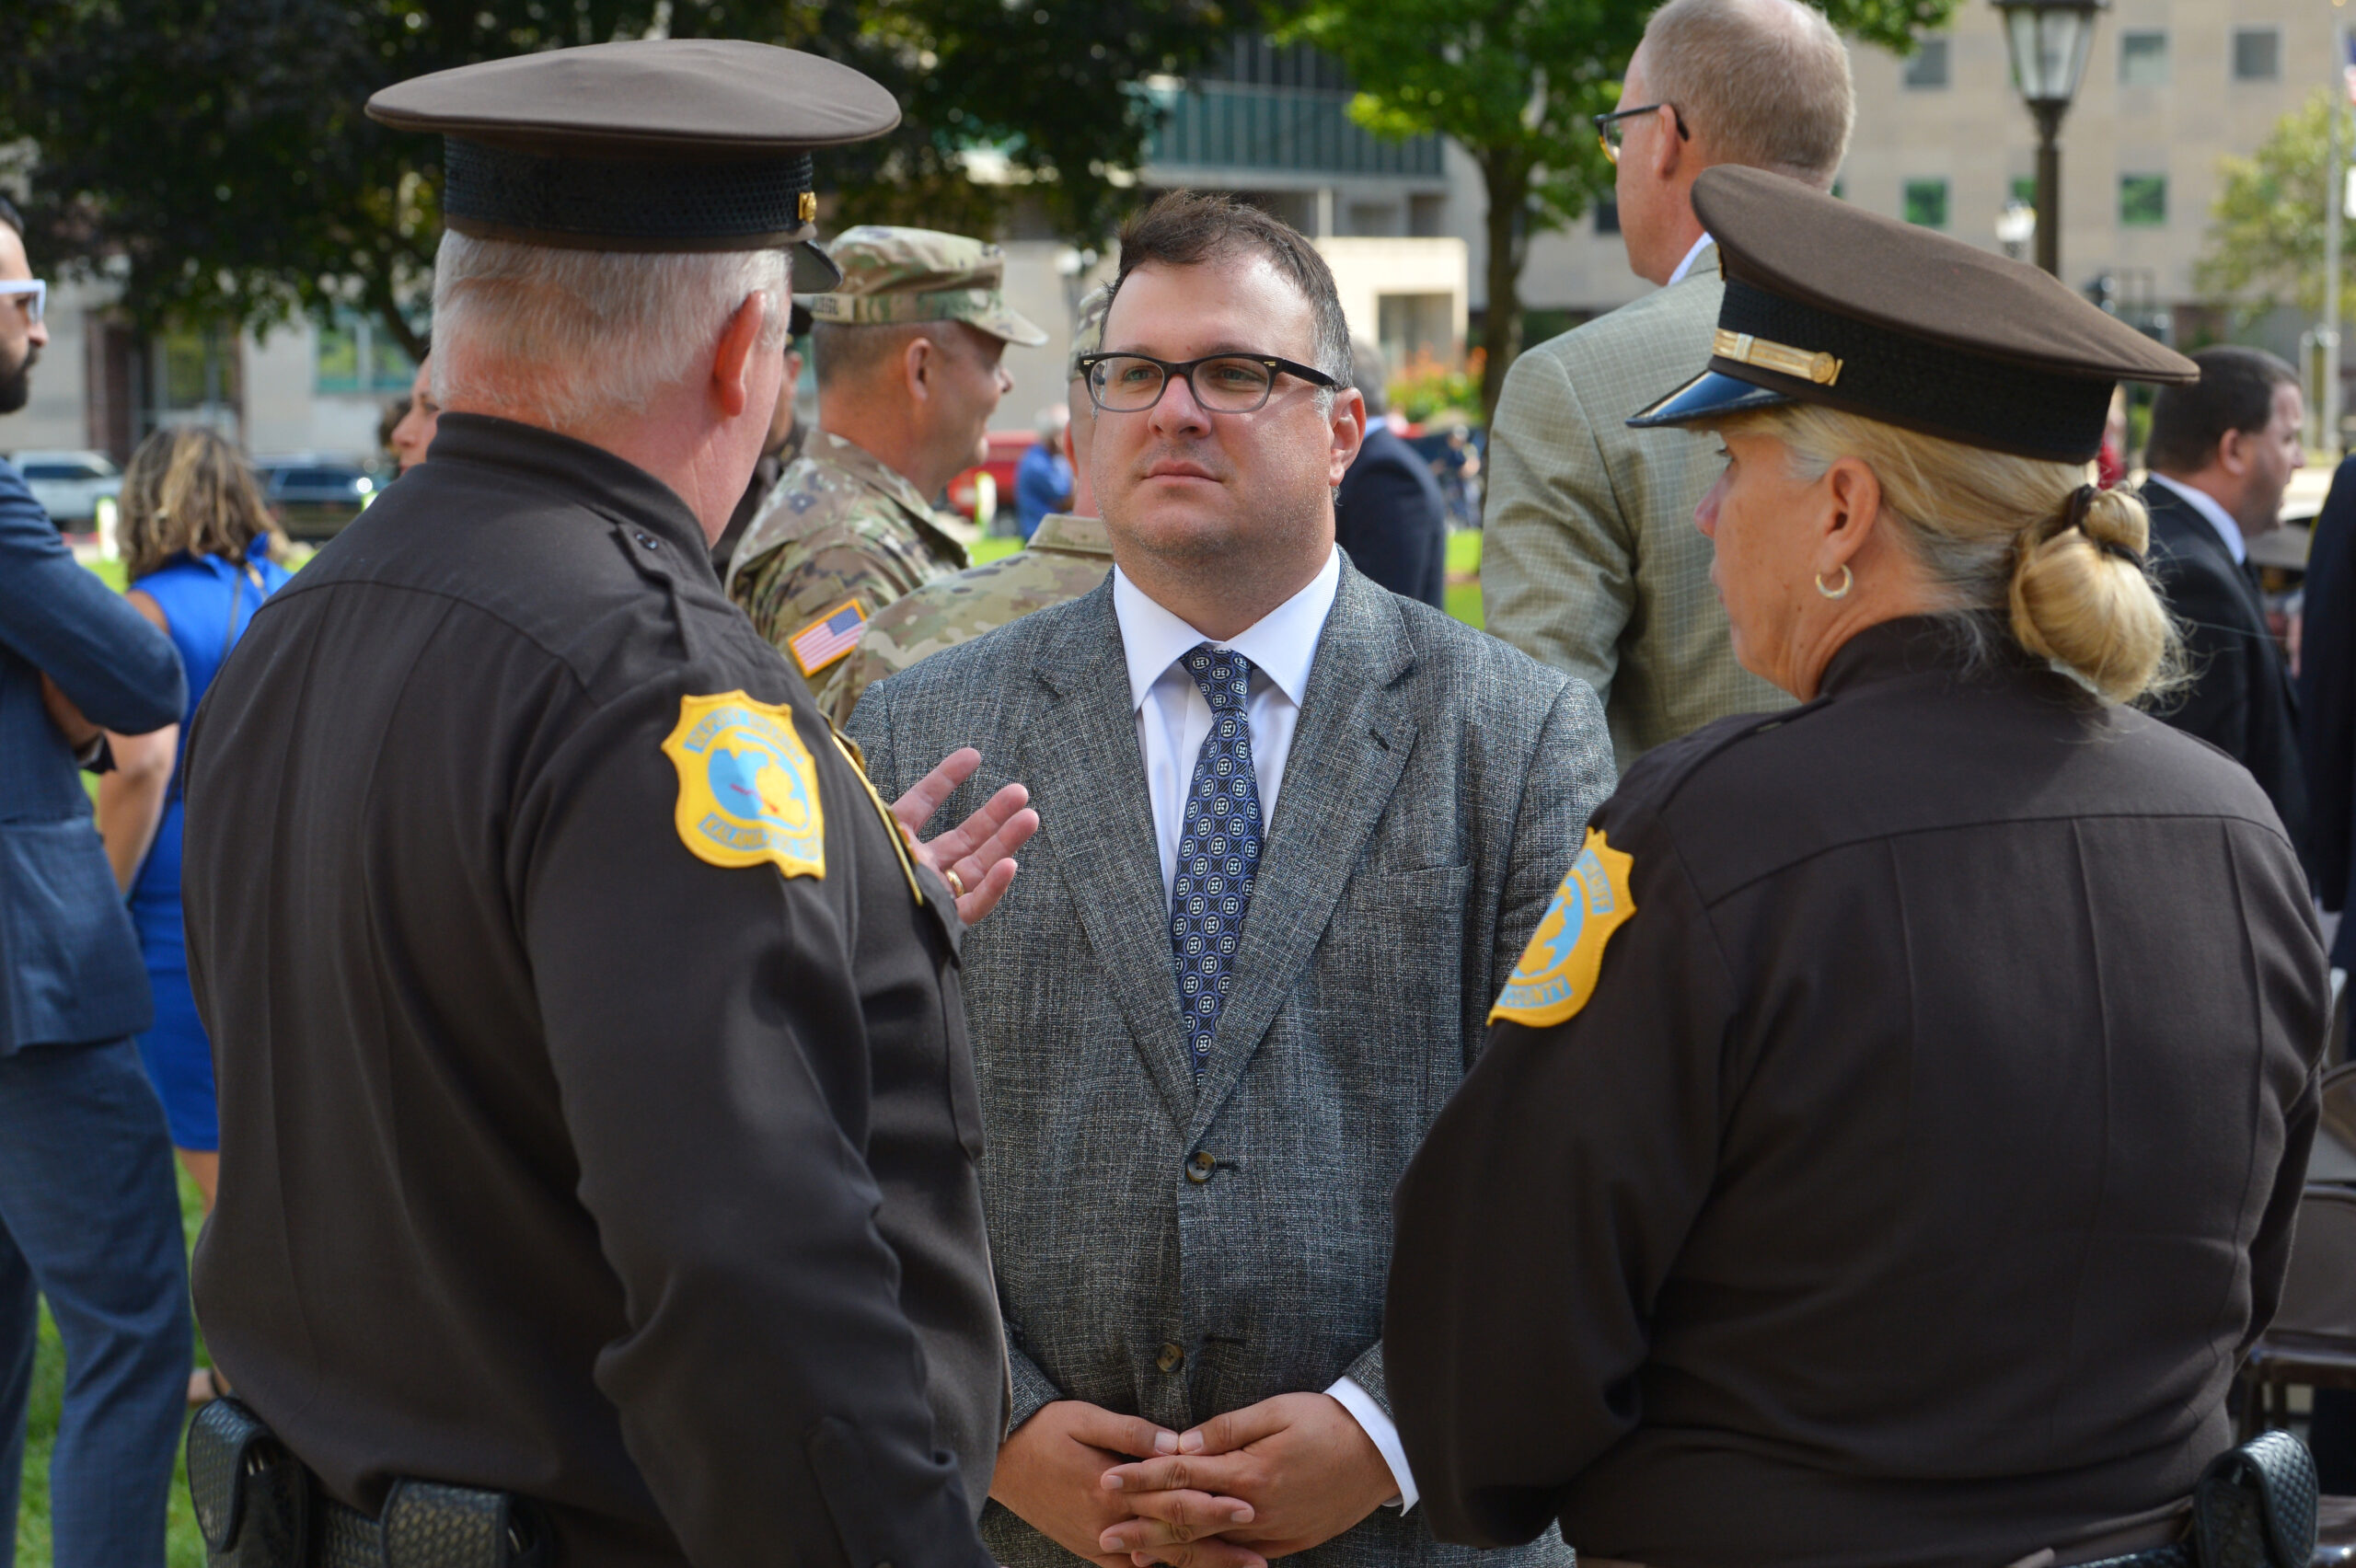 The Police Officers Association of Michigan Has Just Endorsed Rep. Matt Hall For His Election